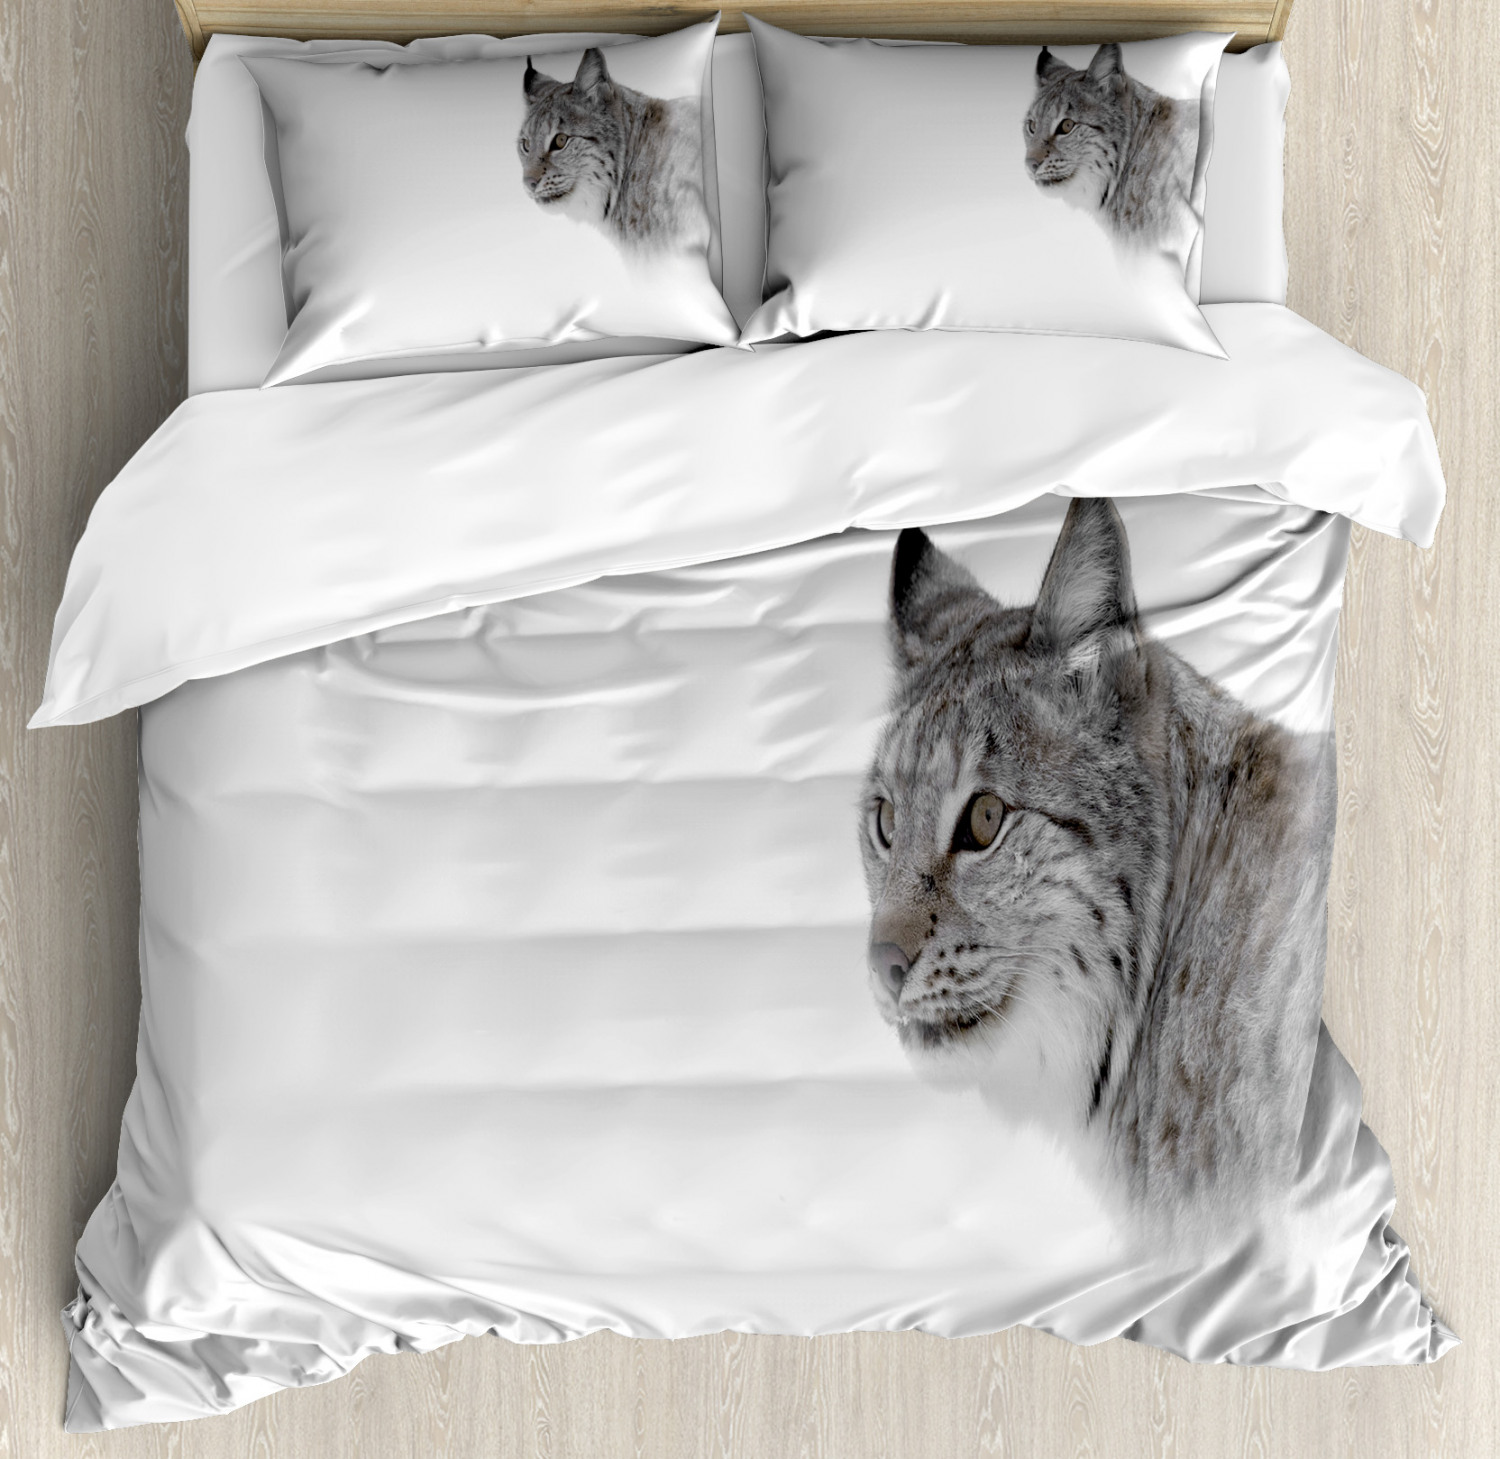 Hunting Duvet Cover Set With Pillow Shams Wild Lynx Norway Print